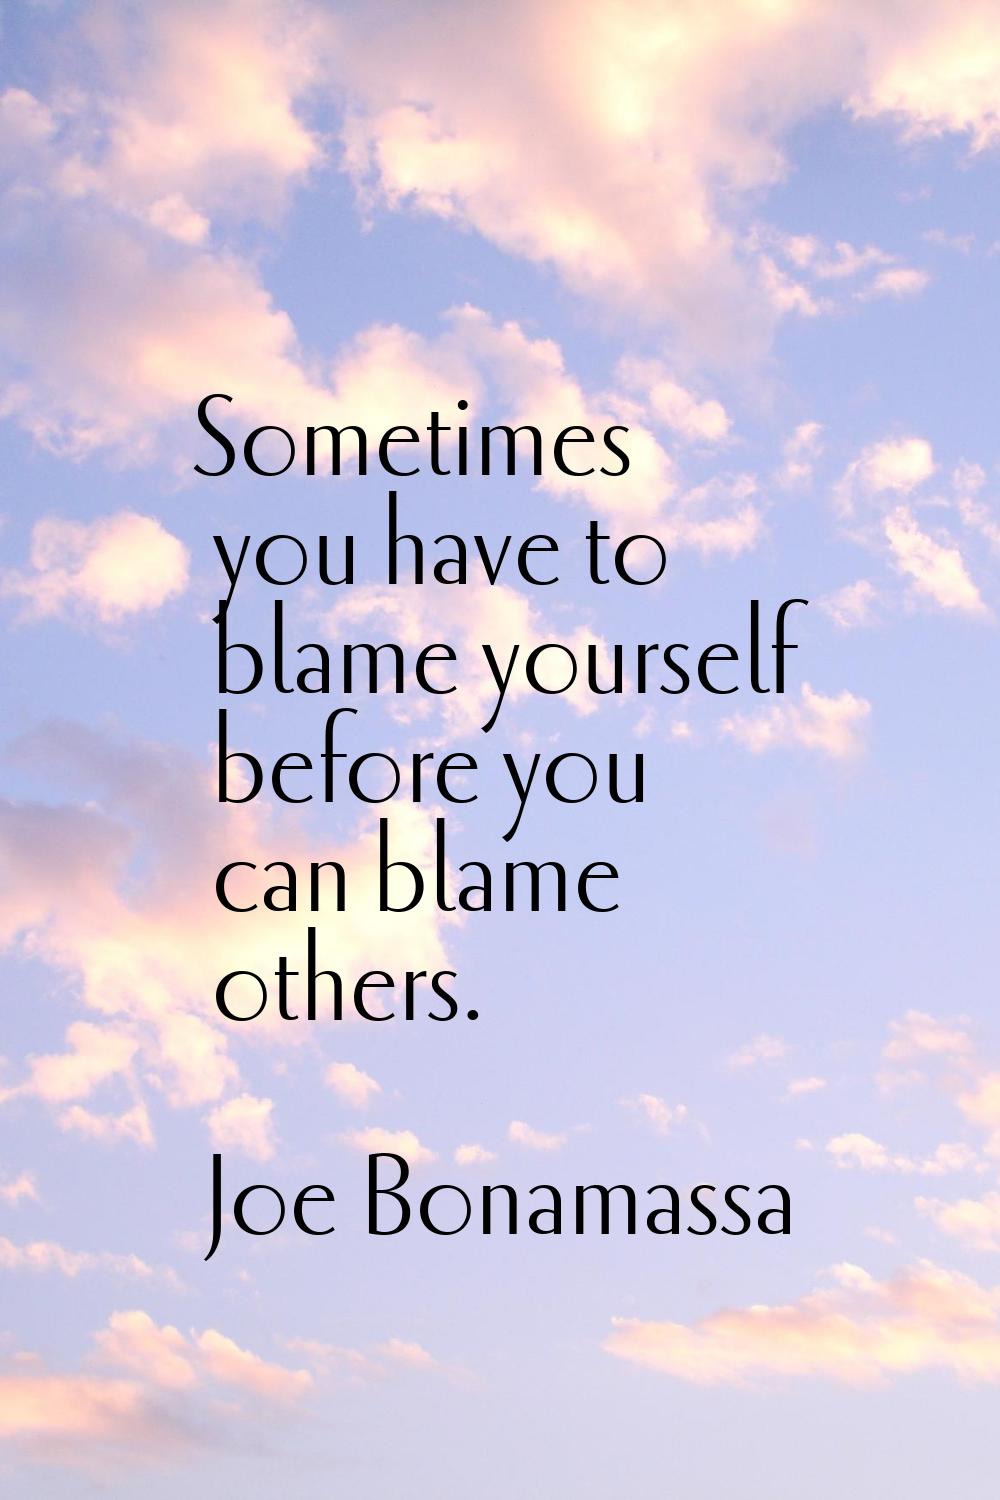 Sometimes you have to blame yourself before you can blame others.